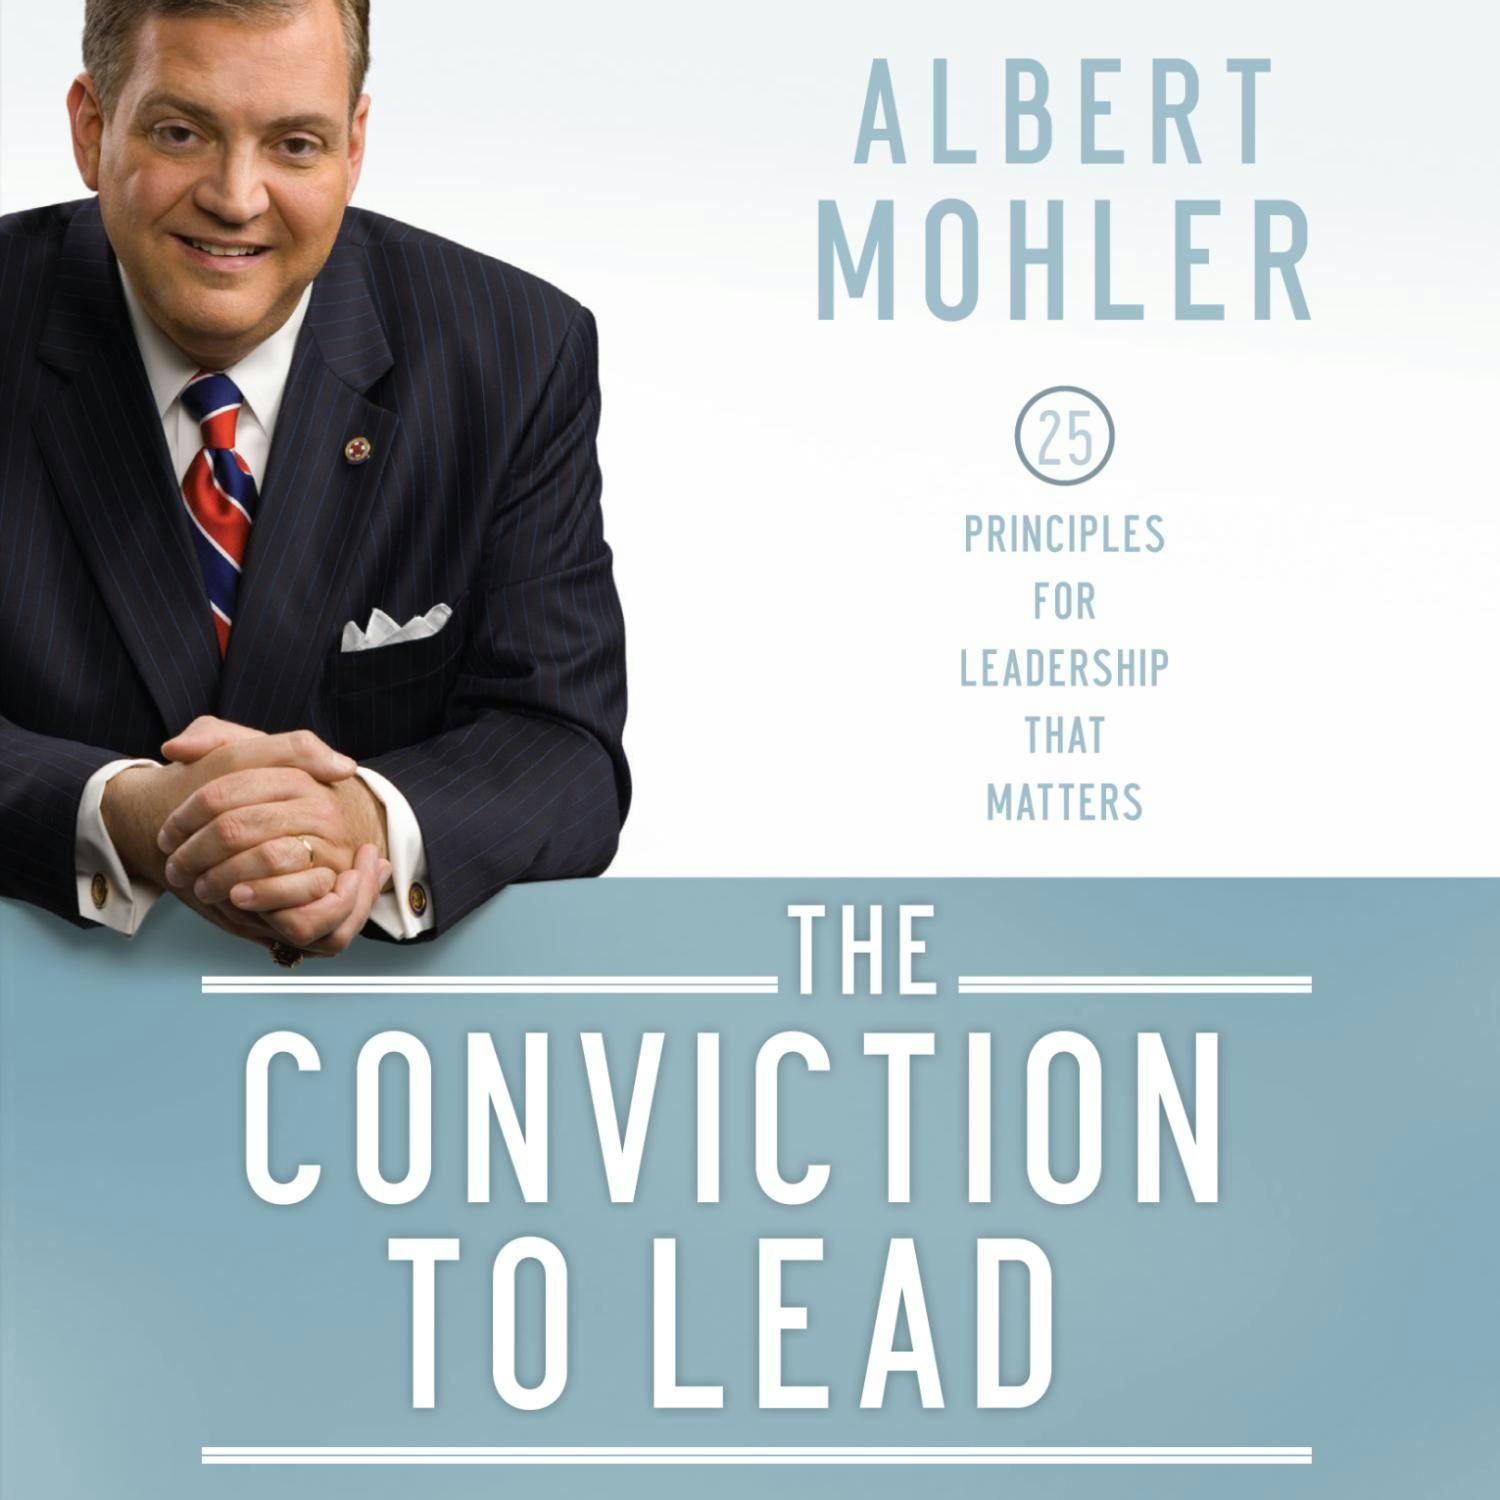 The Conviction to Lead: 25 Principles for Leadership That Matters - Albert Mohler